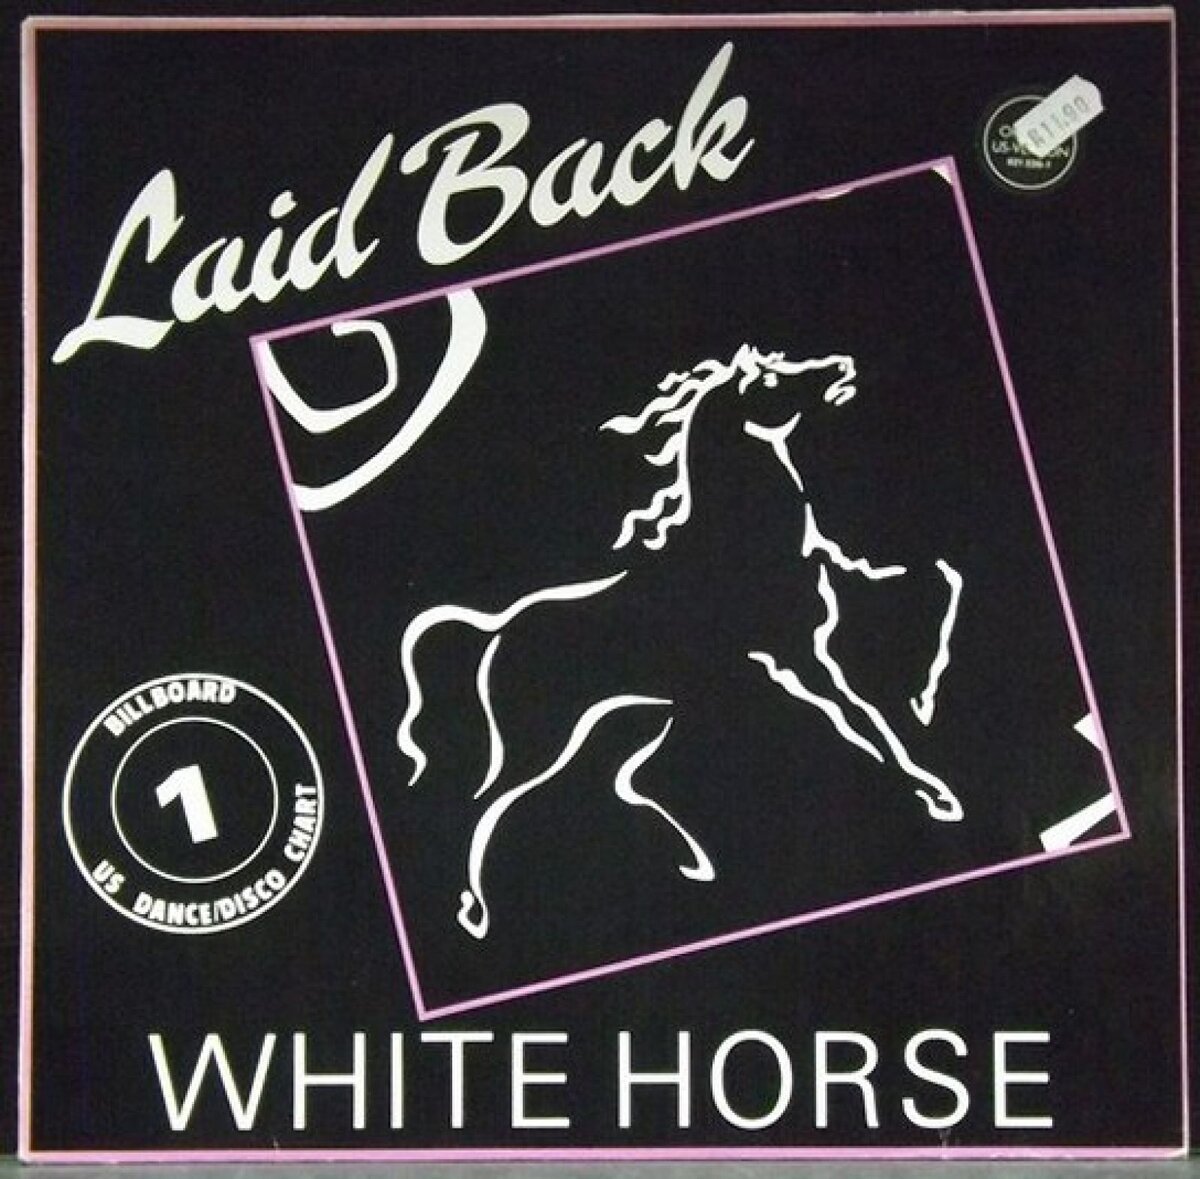 Laid back White Horse. Пьерлуиджи Джомбини 1983. White Horse Song.